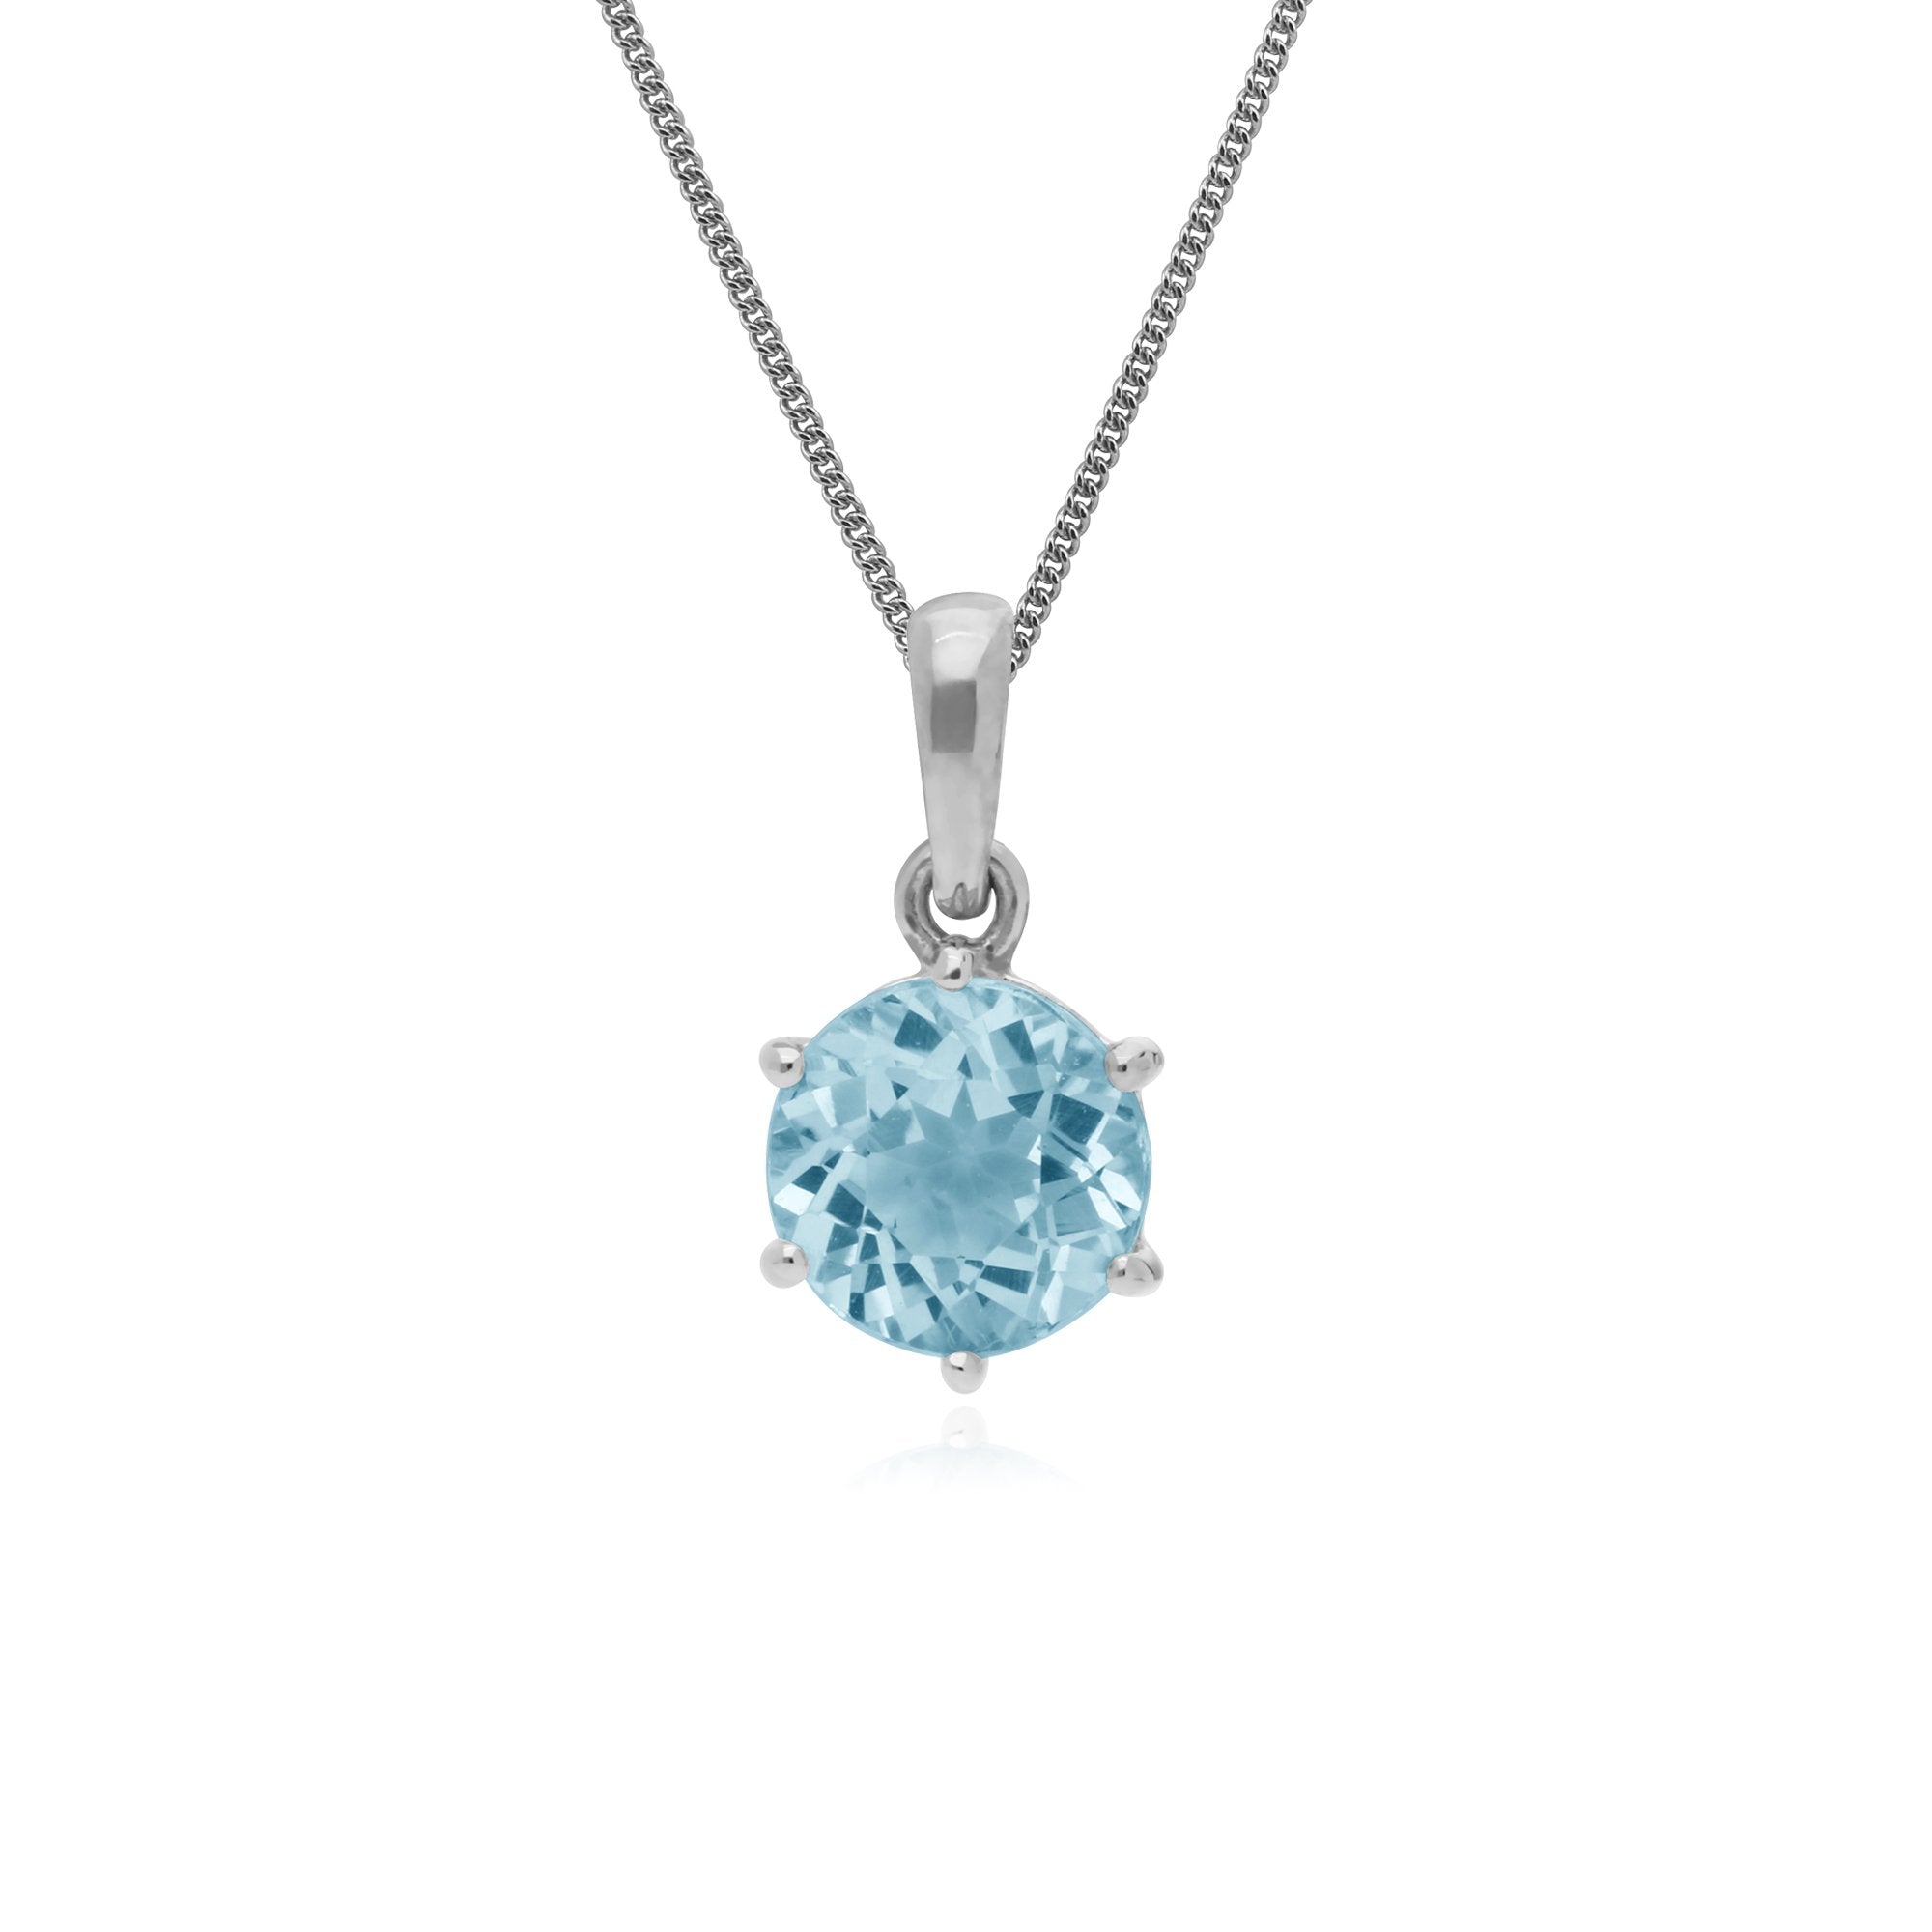 Classic Round Cut Blue Topaz 6 Claw Pendant in 925 Sterling Silver